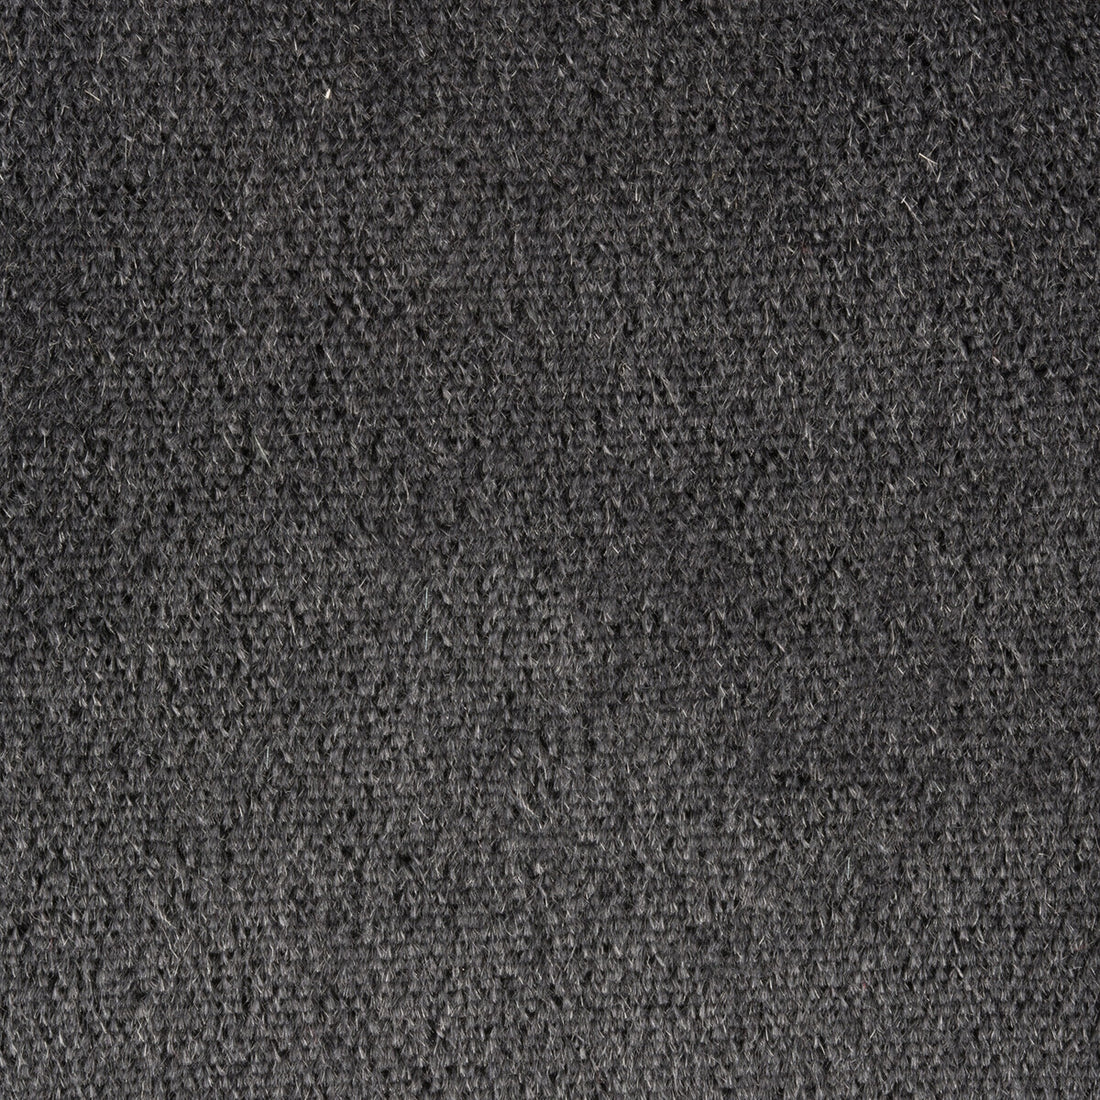 Plazzo Mohair fabric in twilight color - pattern 34259.966.0 - by Kravet Couture